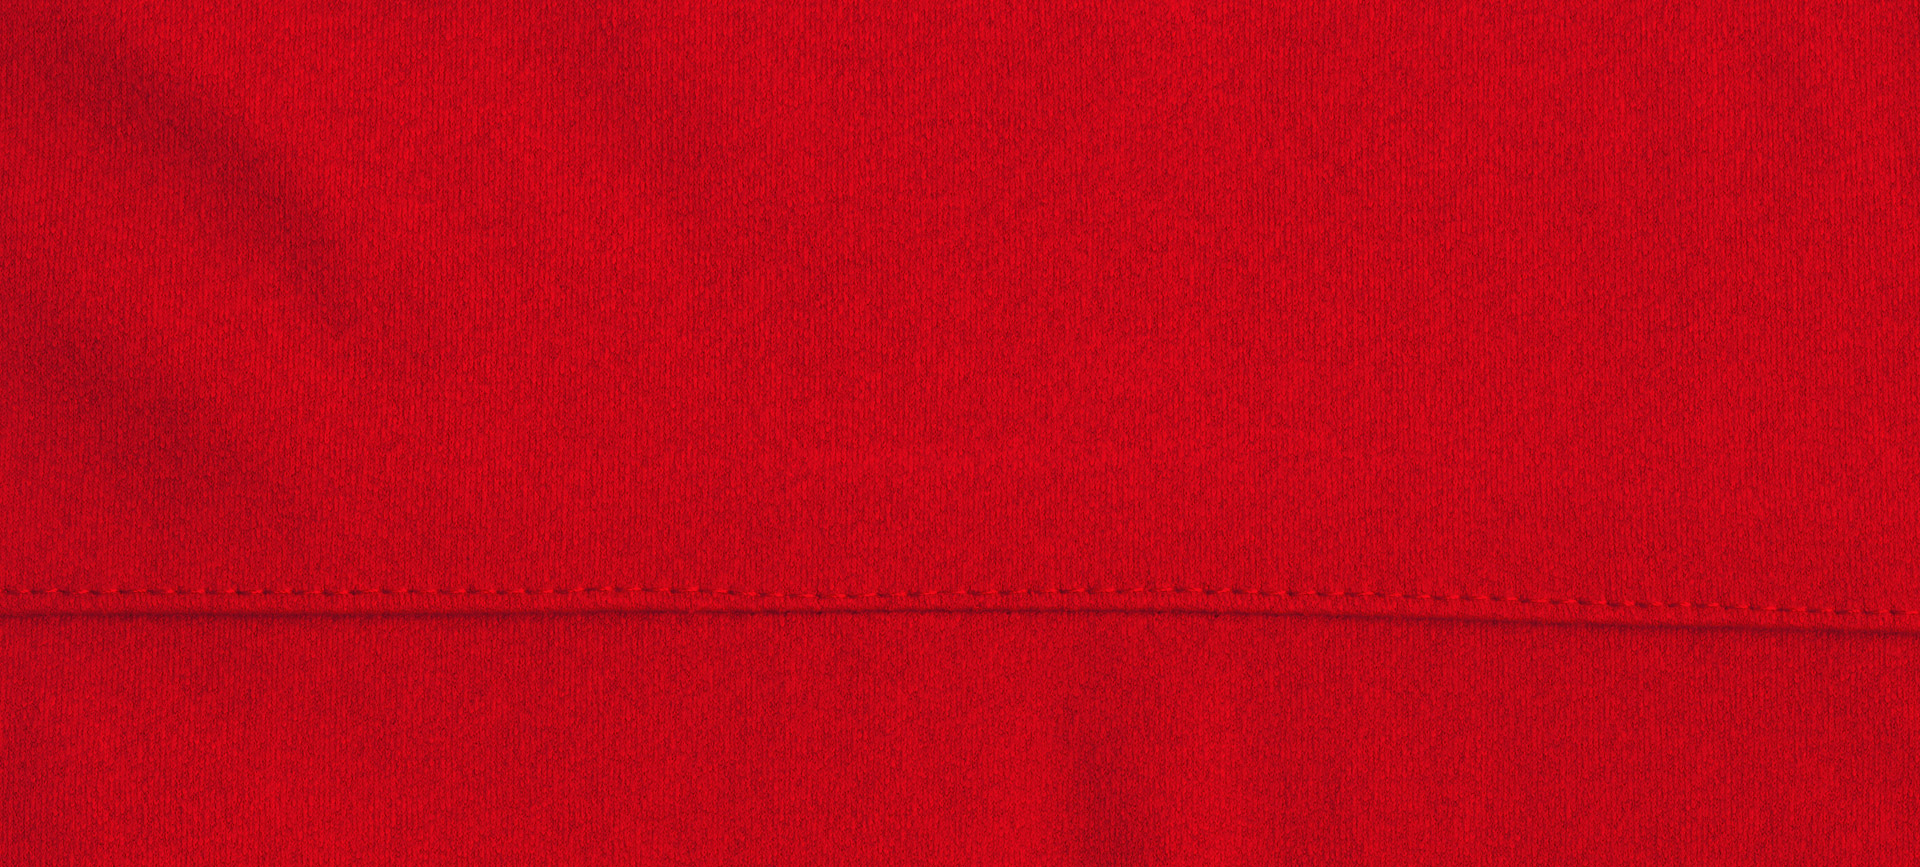 red cloth texture free photo